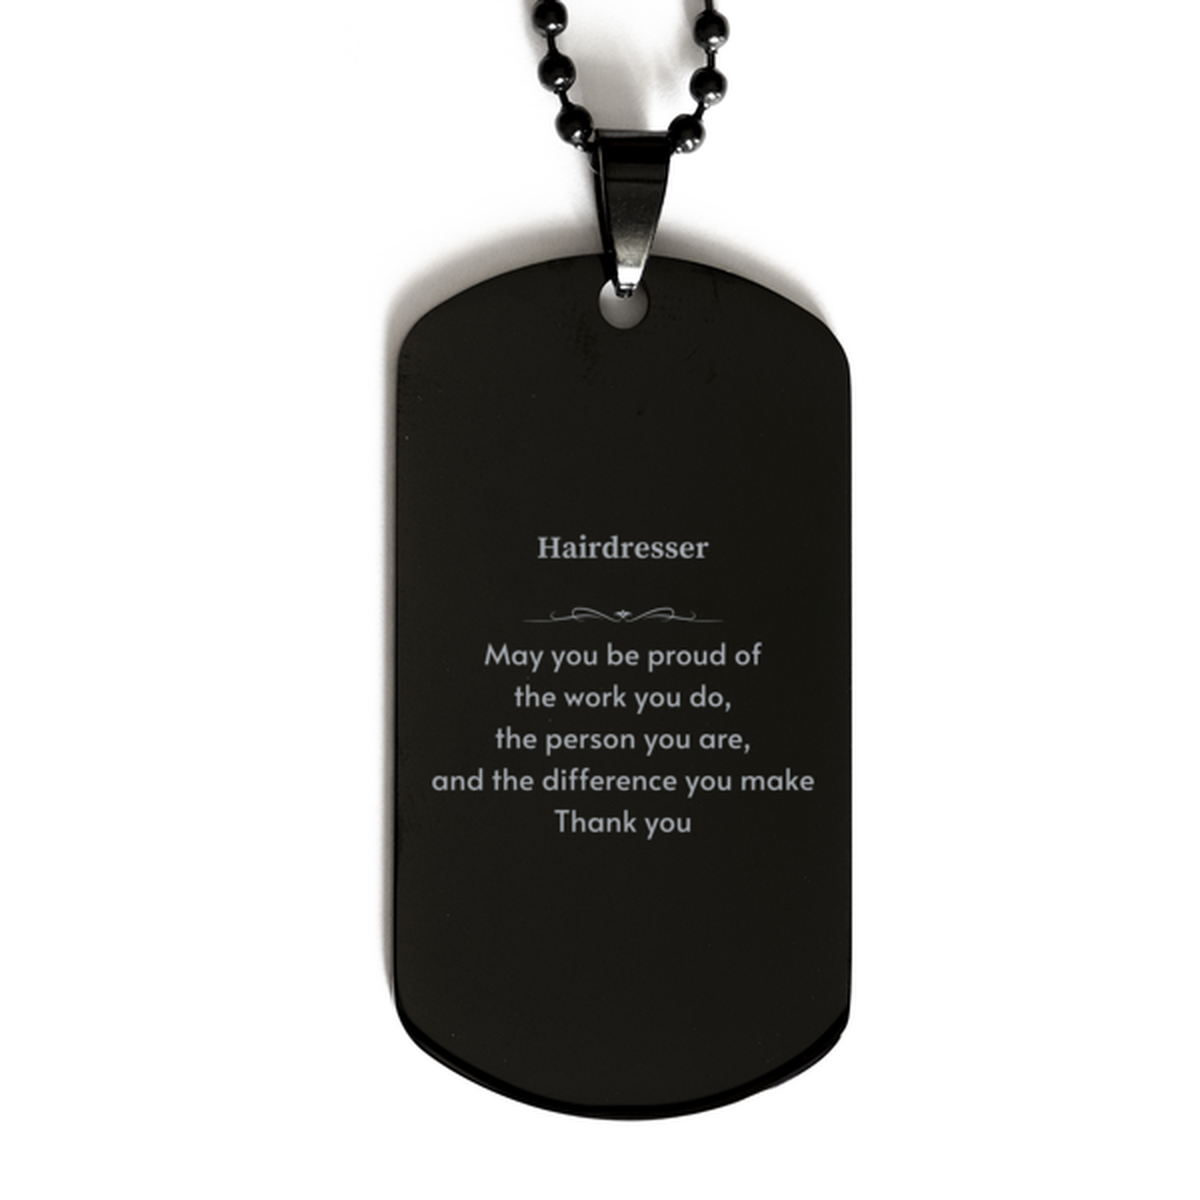 Heartwarming Black Dog Tag Retirement Coworkers Gifts for Hairdresser, Hairdresser May You be proud of the work you do, the person you are Gifts for Boss Men Women Friends